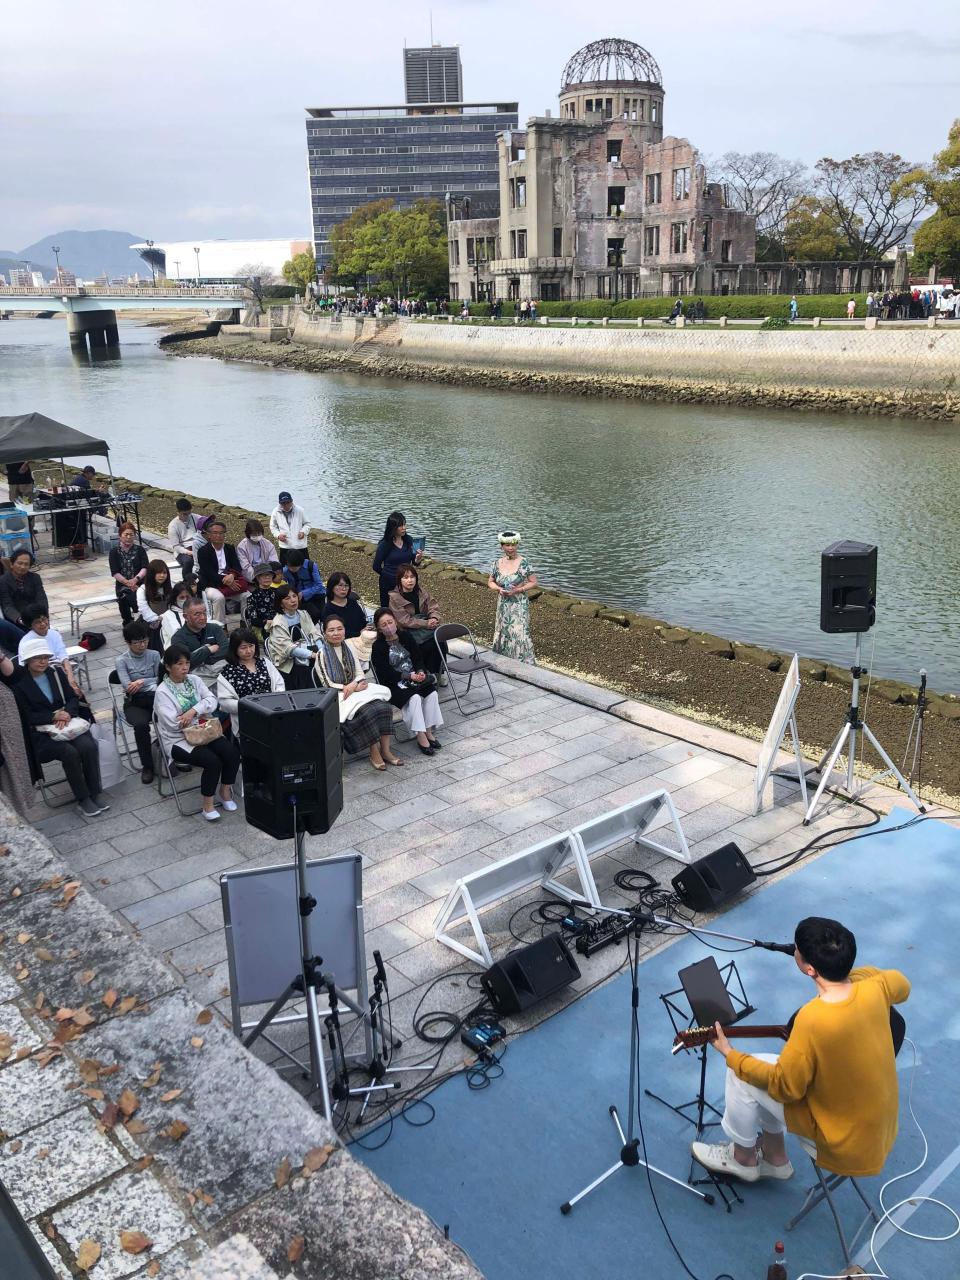 An audience listens to a soft rock concert in Hiroshima Peace Park in Hiroshima, Japan. The park is a commemmoration of the atomic bomb that the United States dropped in August 1945 that brought an end to World War II.